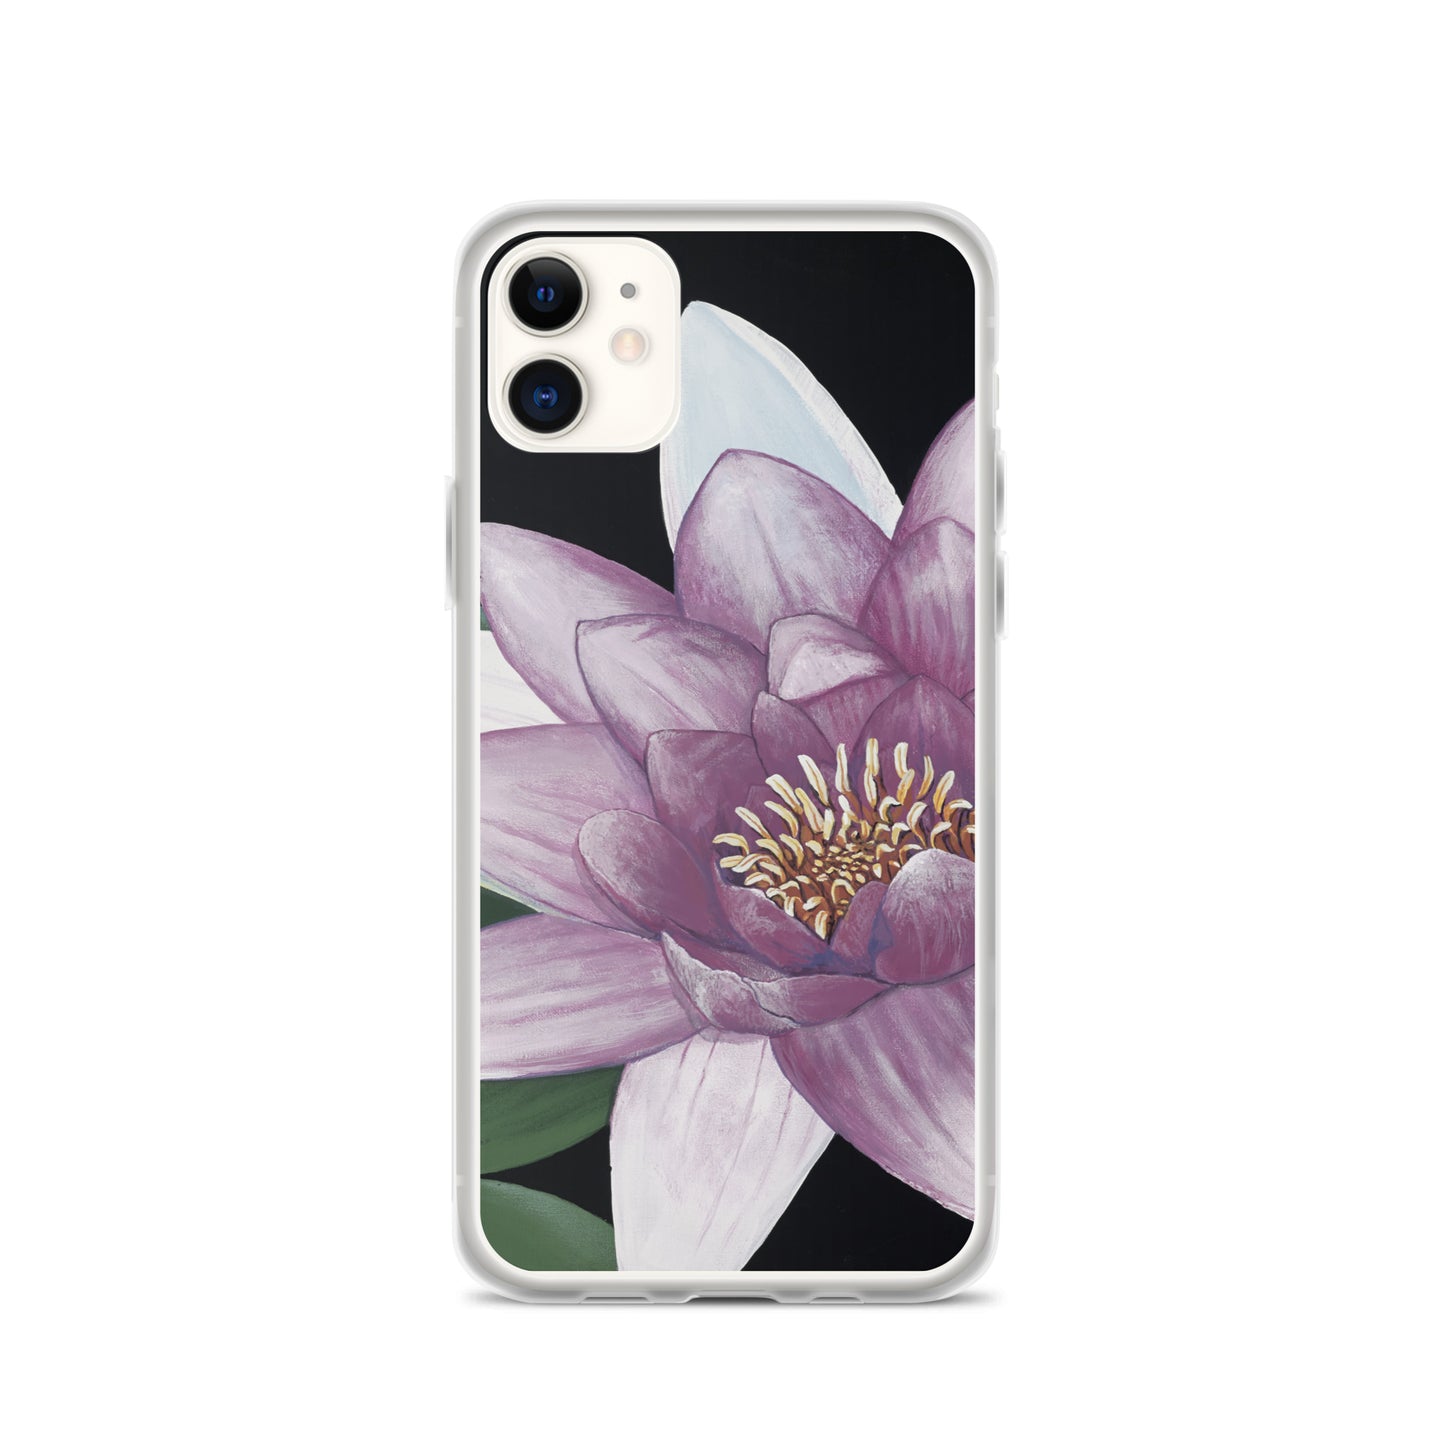 "Lotus Bloomed" iPhone Case